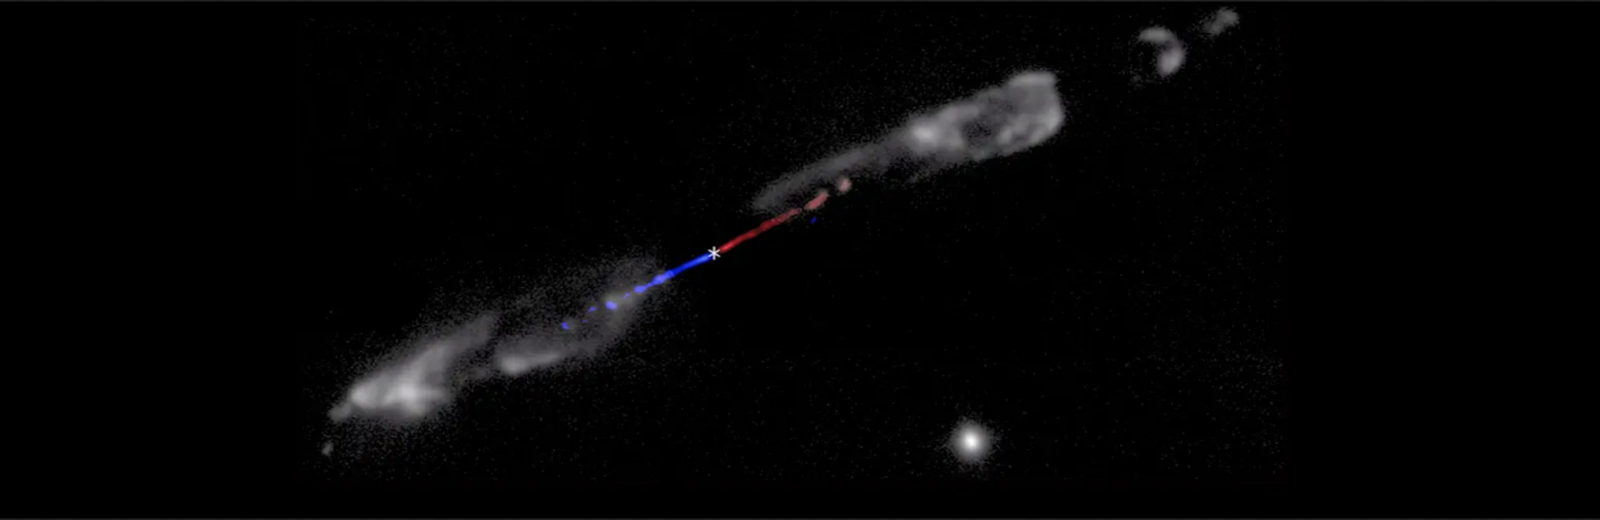 Baby star grows thanks to magnetic fields in jets